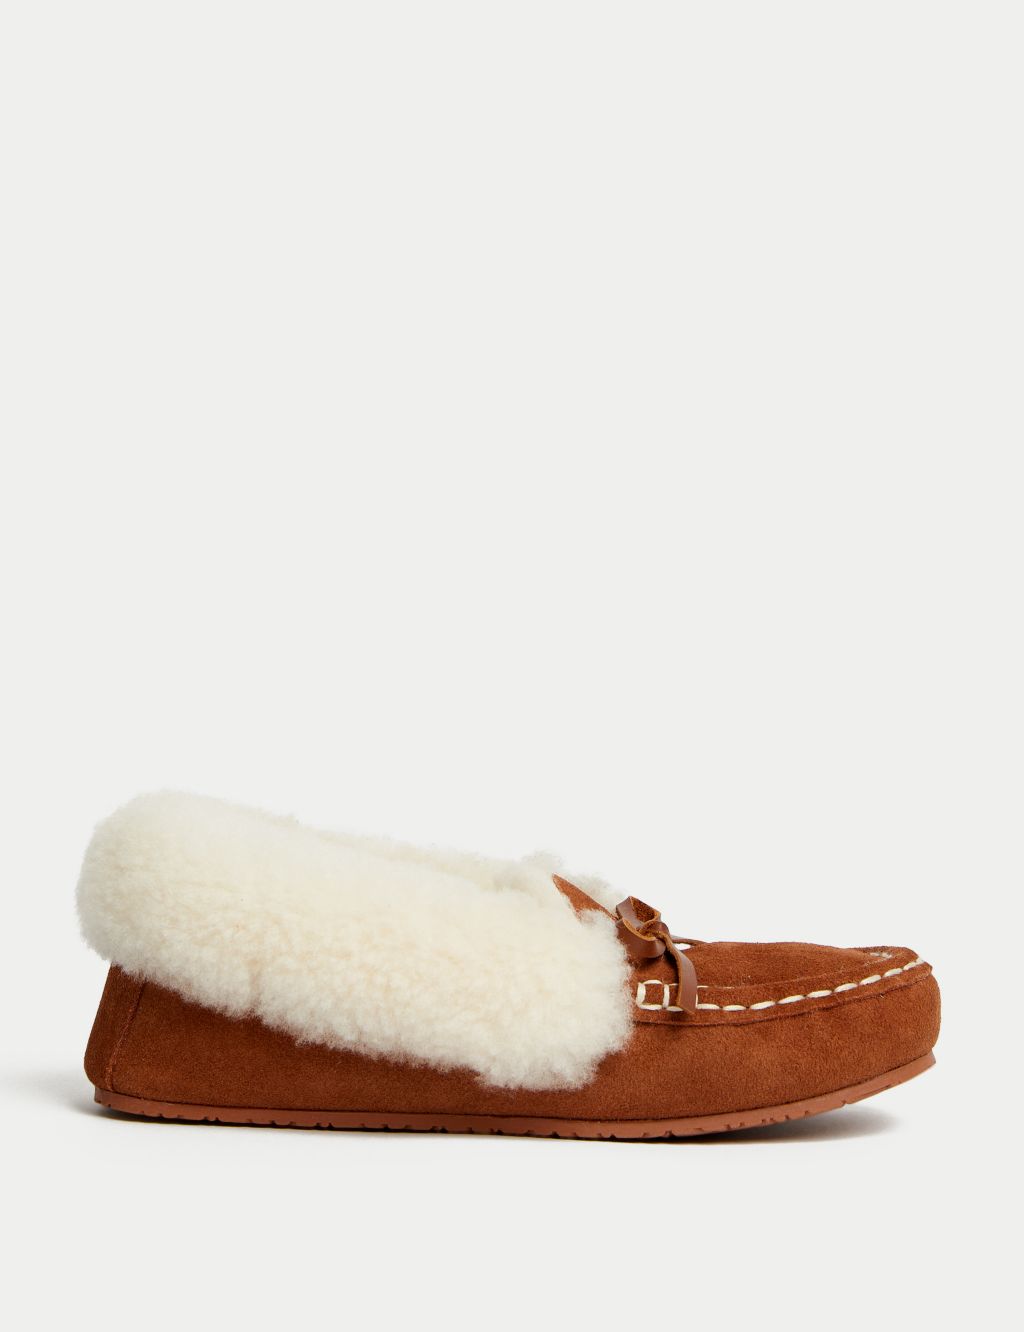 Suede Shearling Cuff Moccasin Slippers image 1